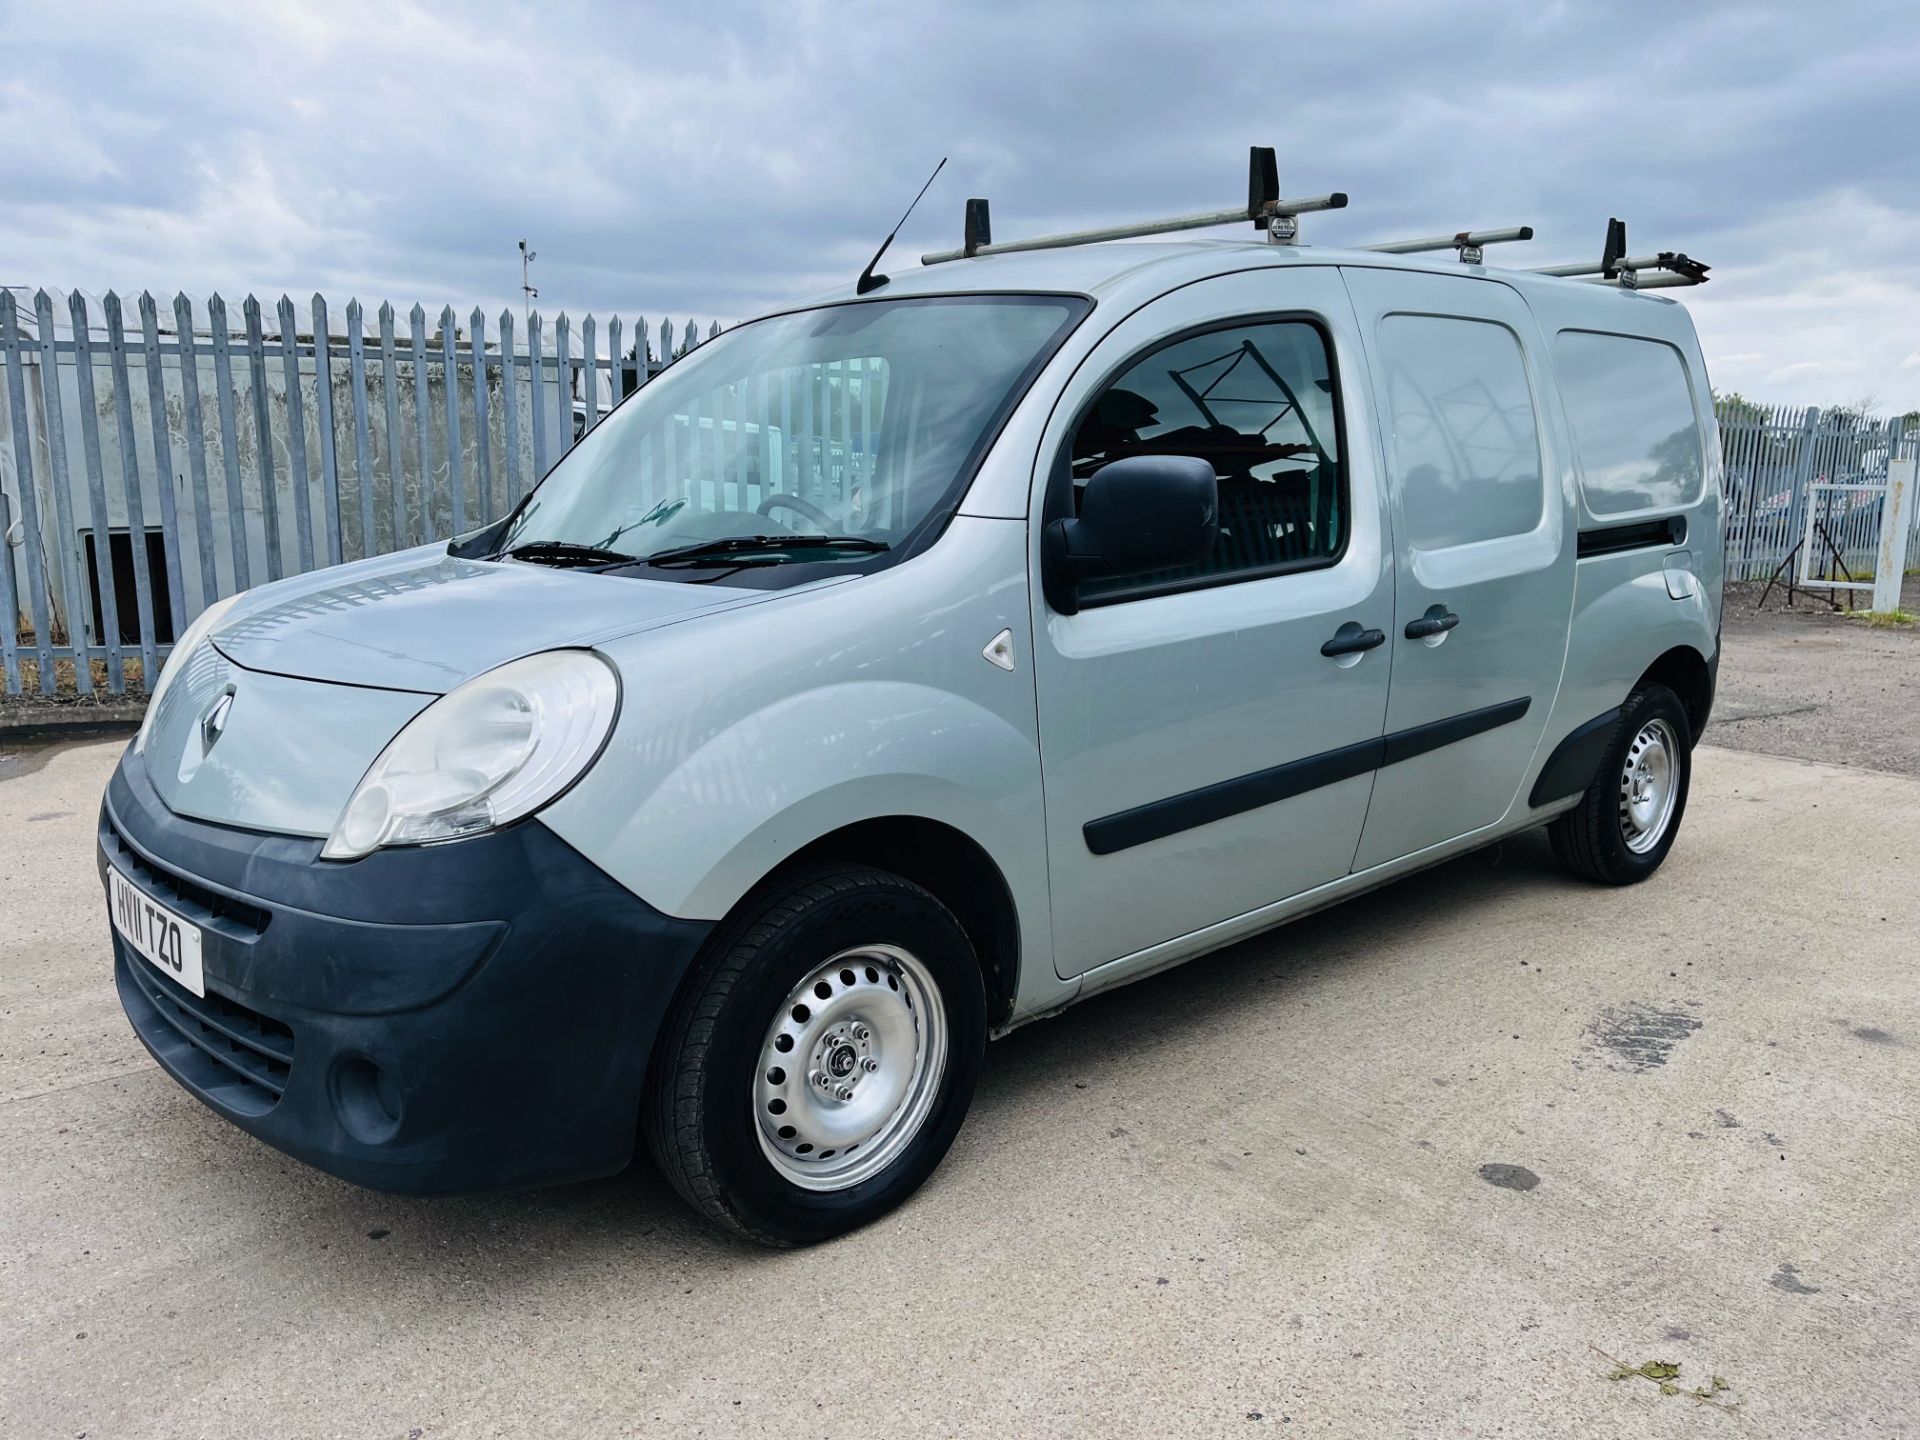 (Reserve Met) Renault Kangoo dci "Maxi Plus" 11reg - Rare and hard to find a Maxi Plus model -No Vat - Image 6 of 18